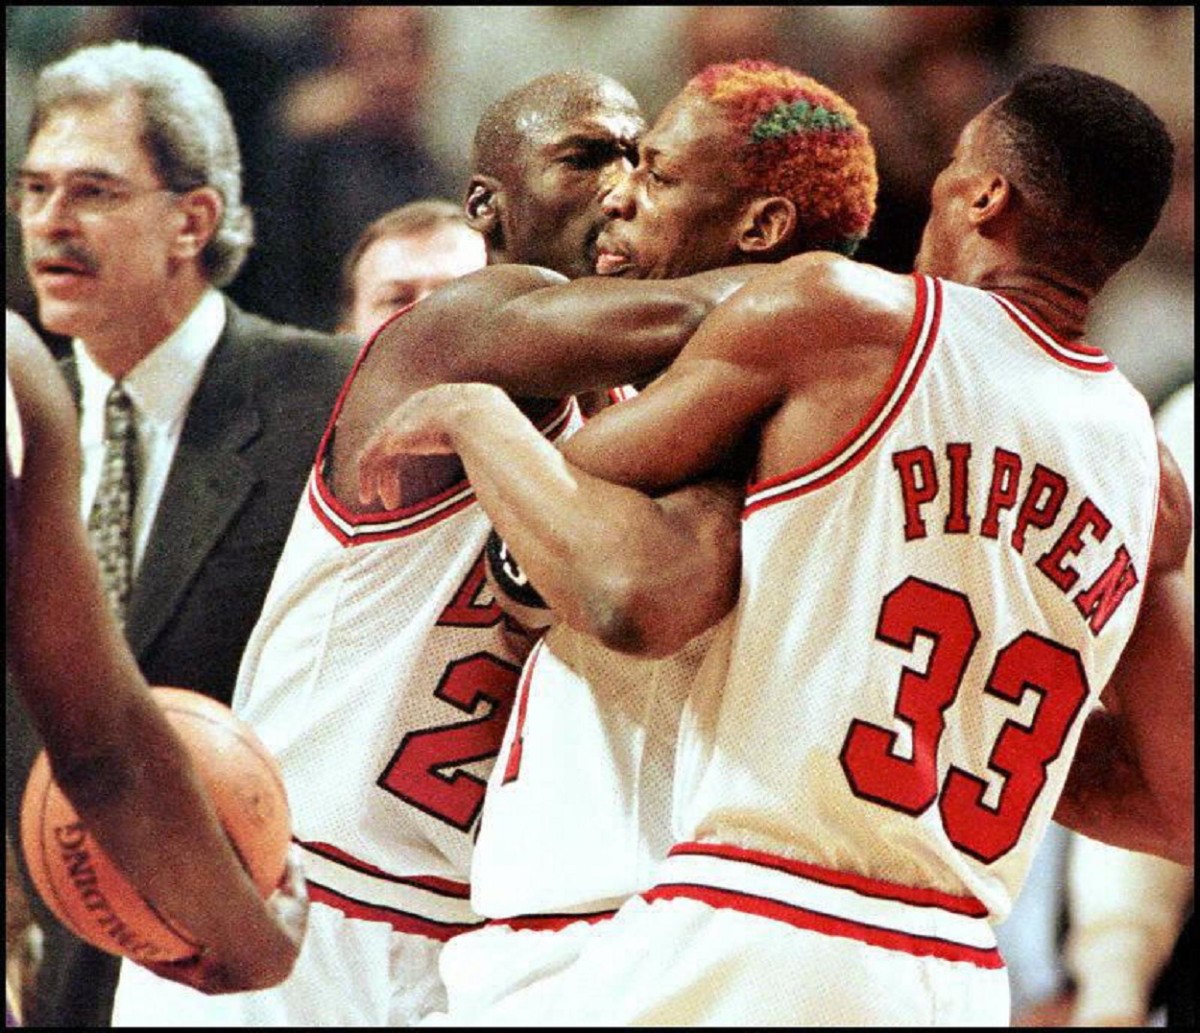 Michael Jordan And Scottie Pippen Had To Hold Dennis Rodman Back So He Wouldn’t Get Suspended Trying To Fight Shaquille O'Neal And The Lakers